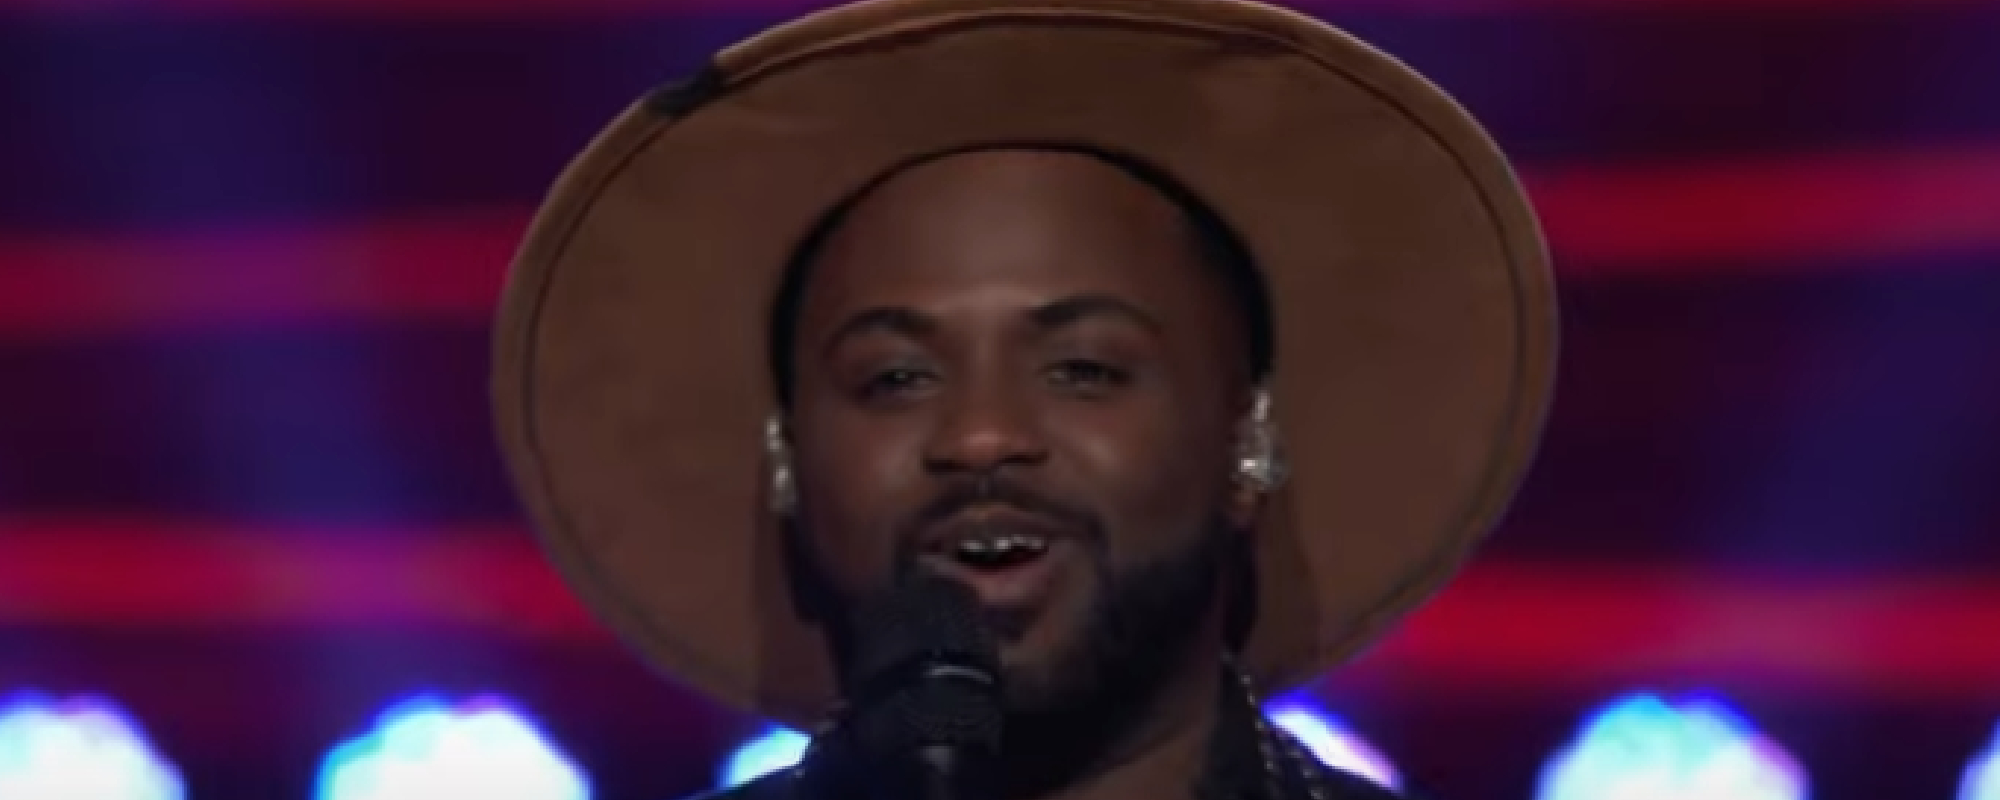 ‘The Voice’ Tae Lewis “Raises the Bar” With Knockout Performance of “Runnin’ Outta Moonlight”